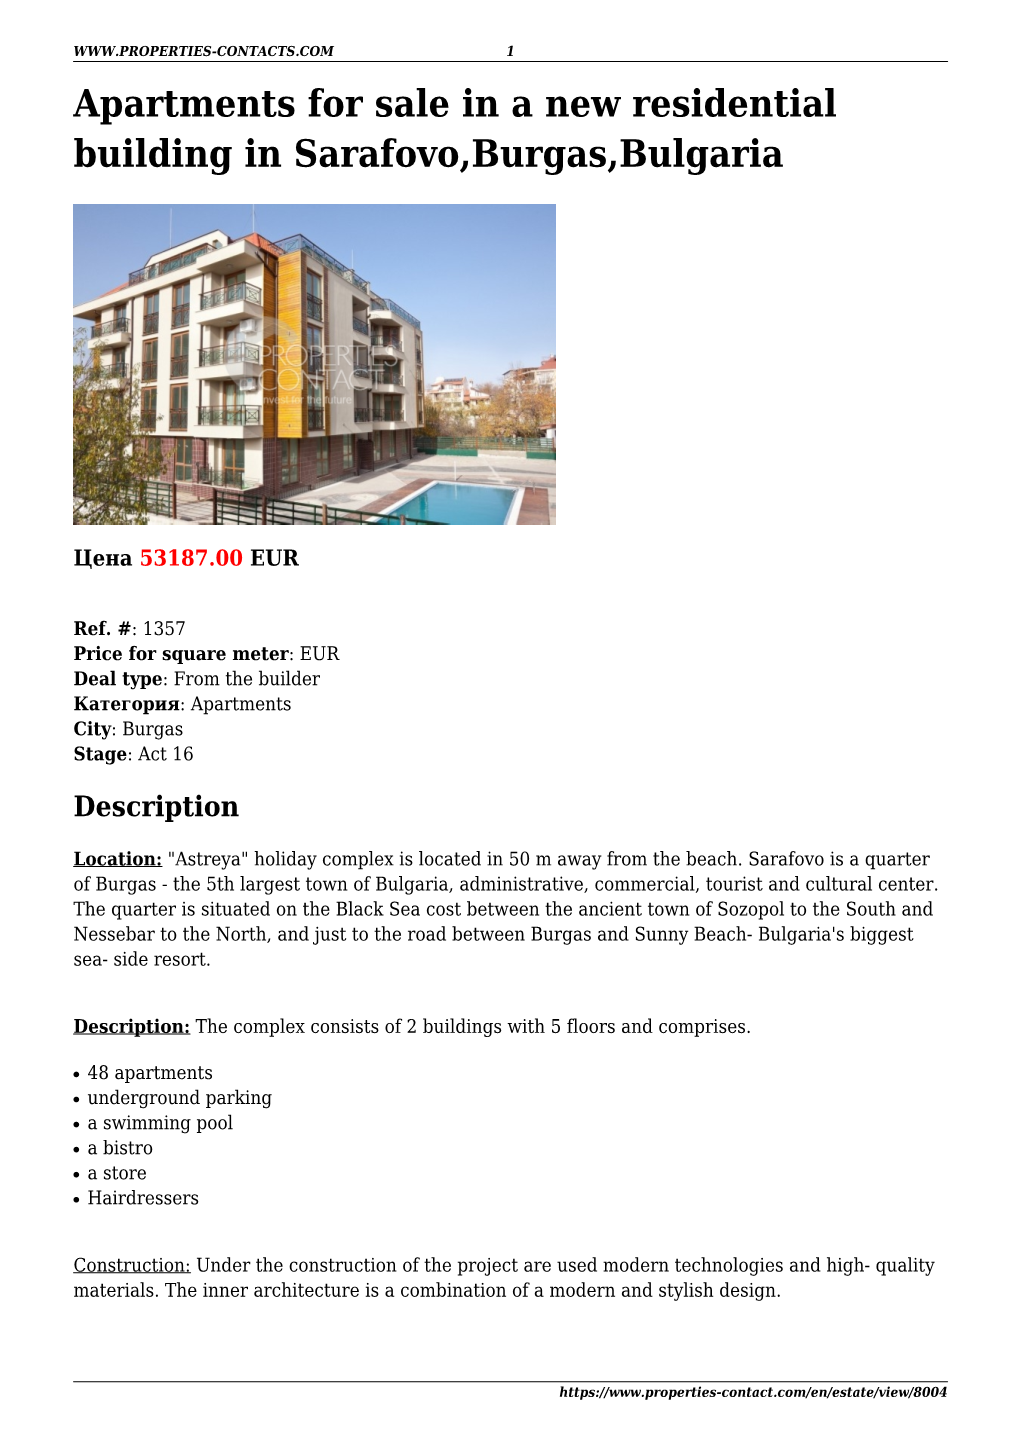 Apartments for Sale in a New Residential Building in Sarafovo,Burgas,Bulgaria